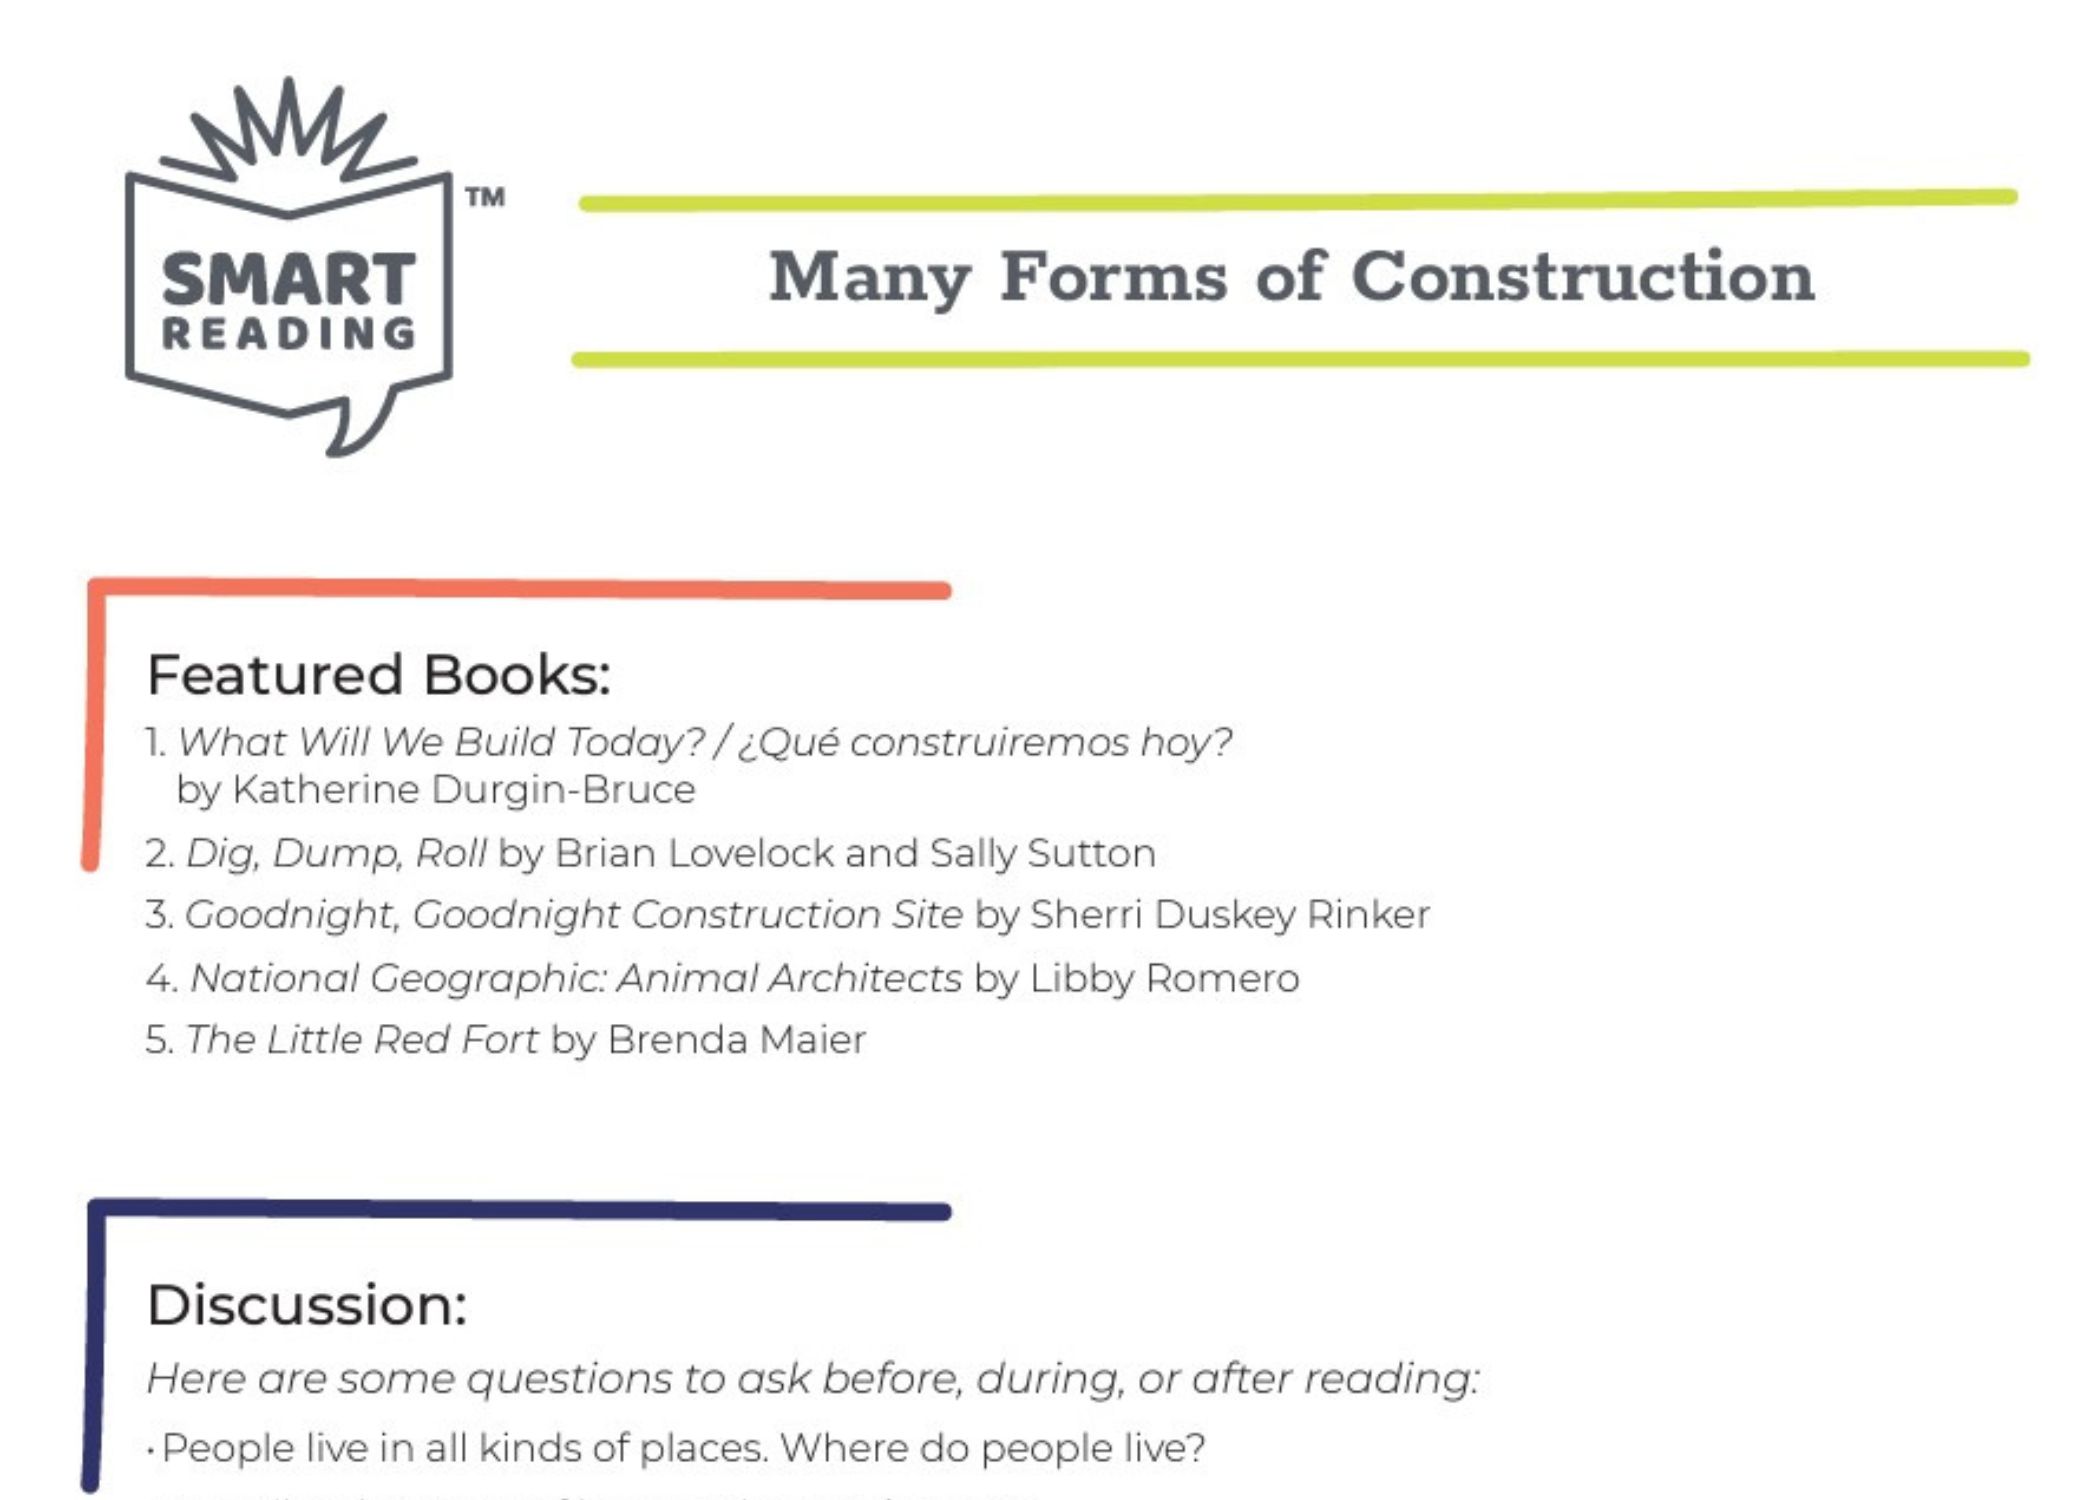 Image of the top half of a construction-themed activity sheet.